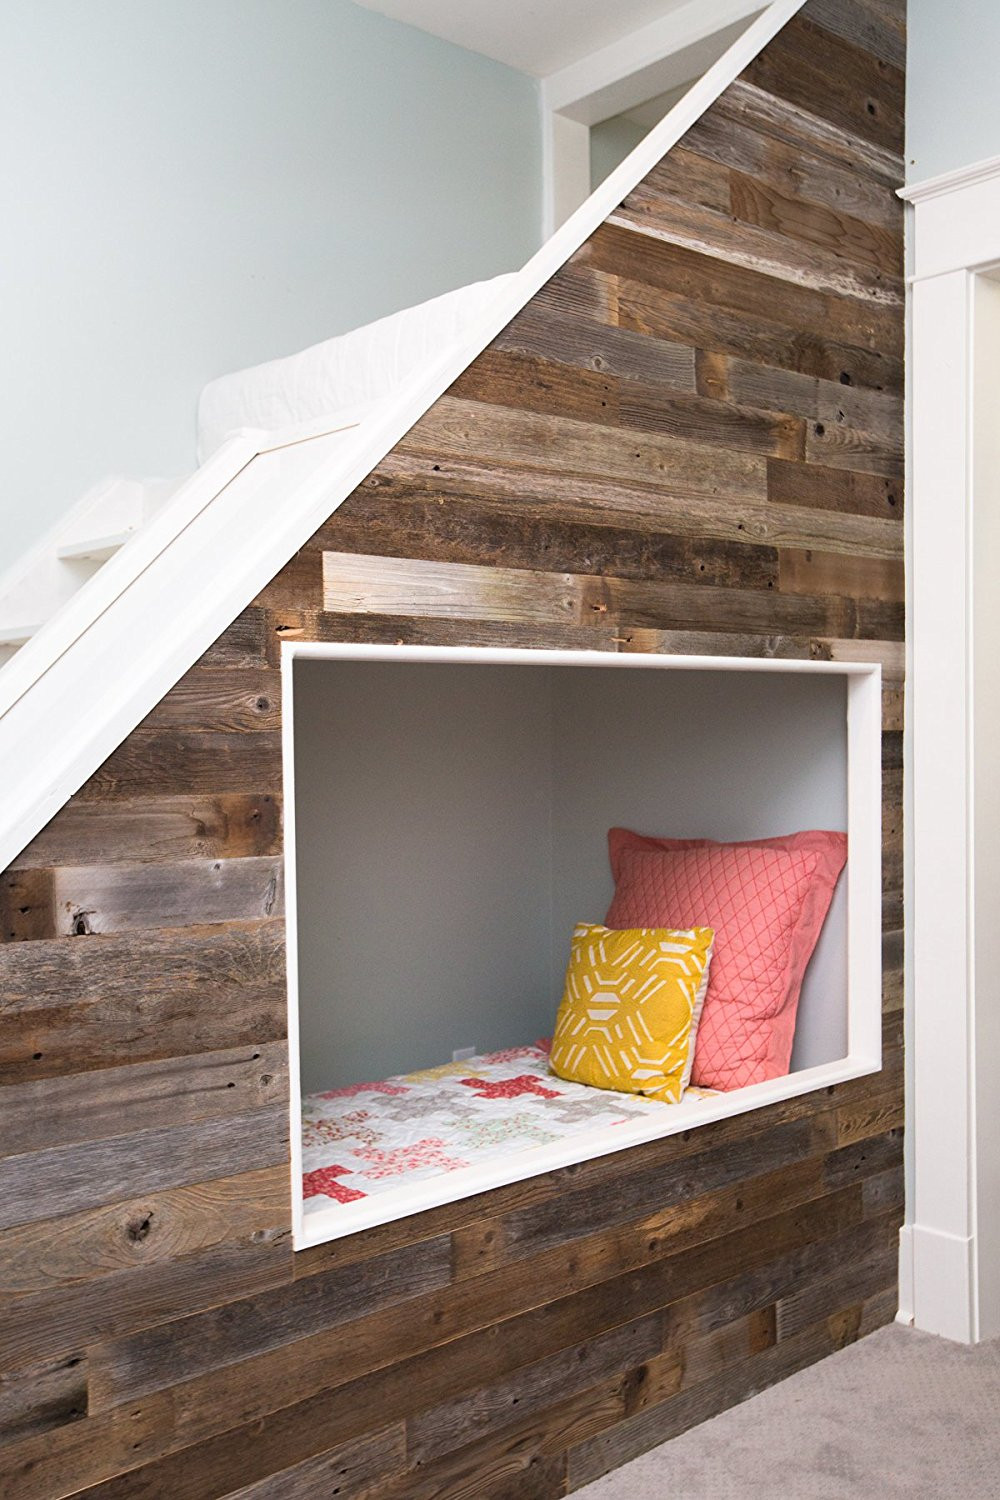 DIY Wood Paneling Walls
 DIY Reclaimed Barn Wood Wall Just peel and stick to apply